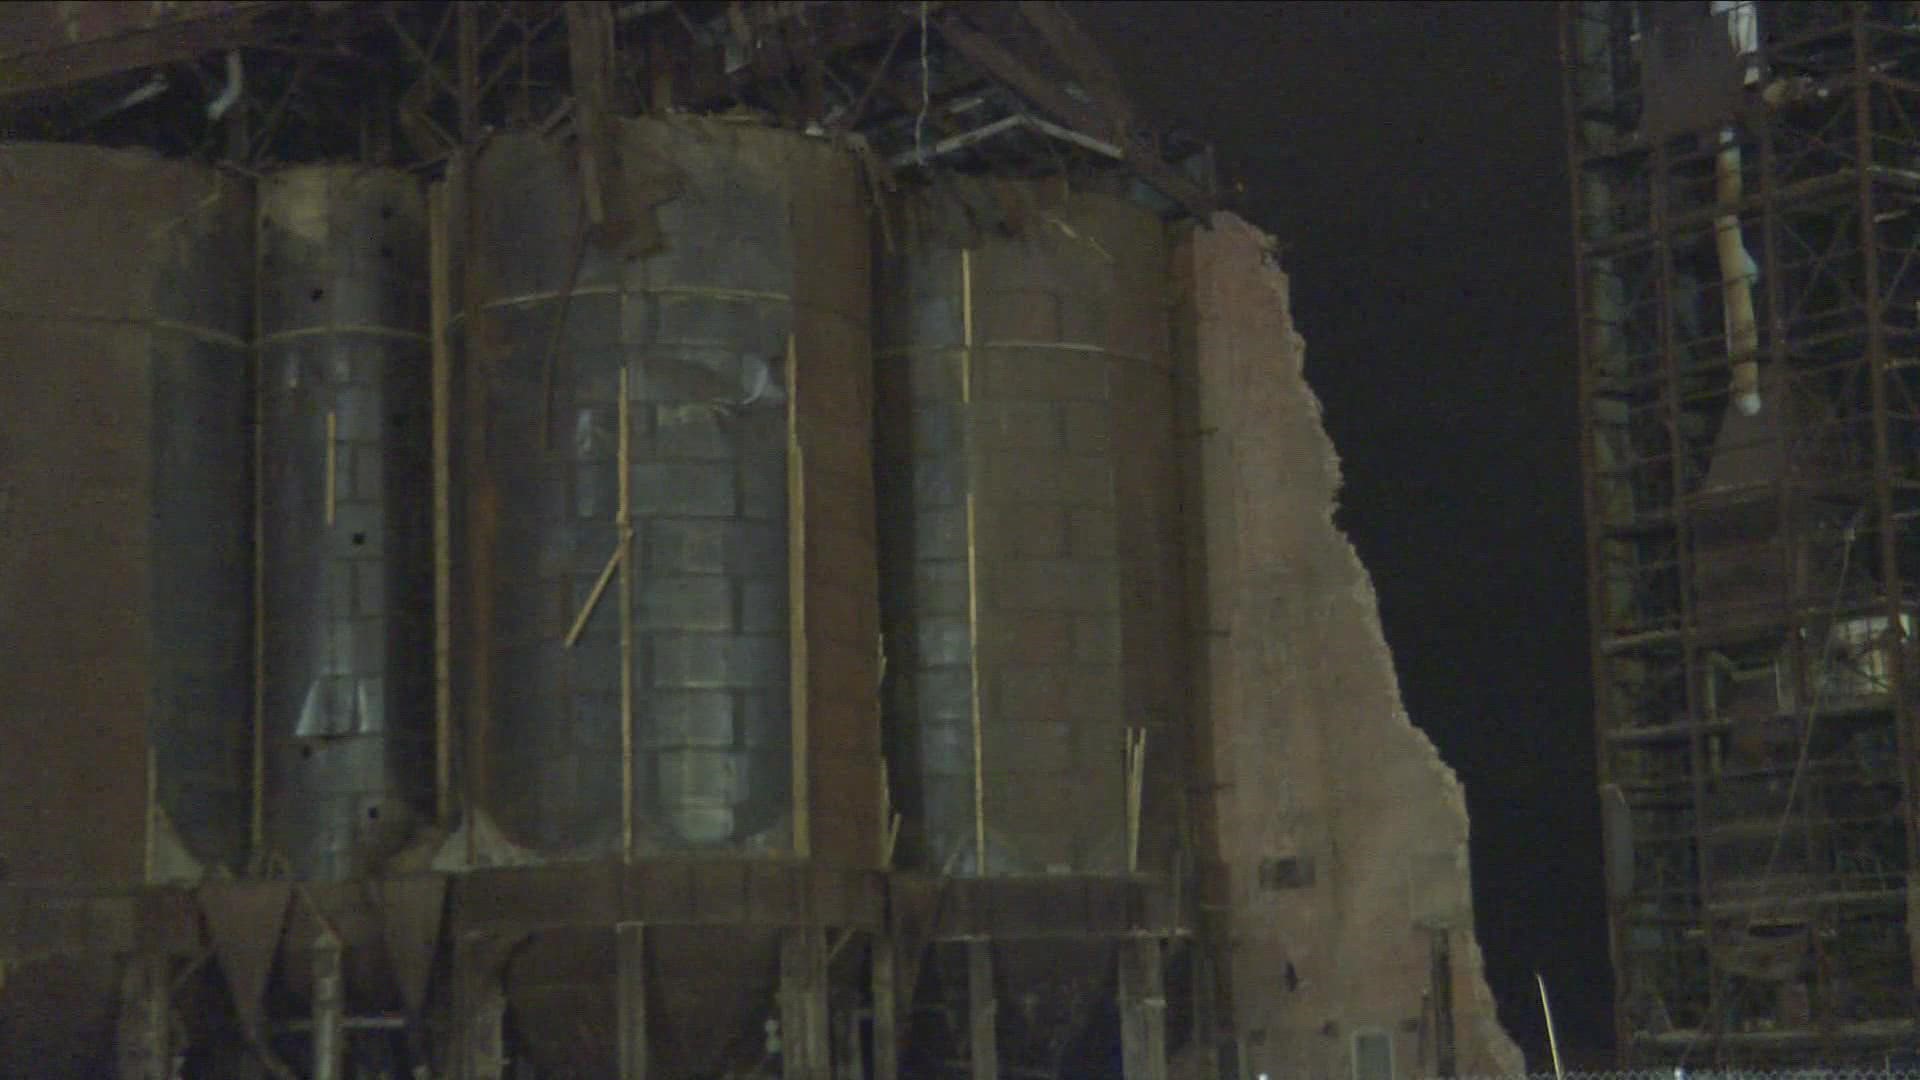 The denial of the preliminary injunction is another bump in the road for preservationists efforts to save the grain elevator.